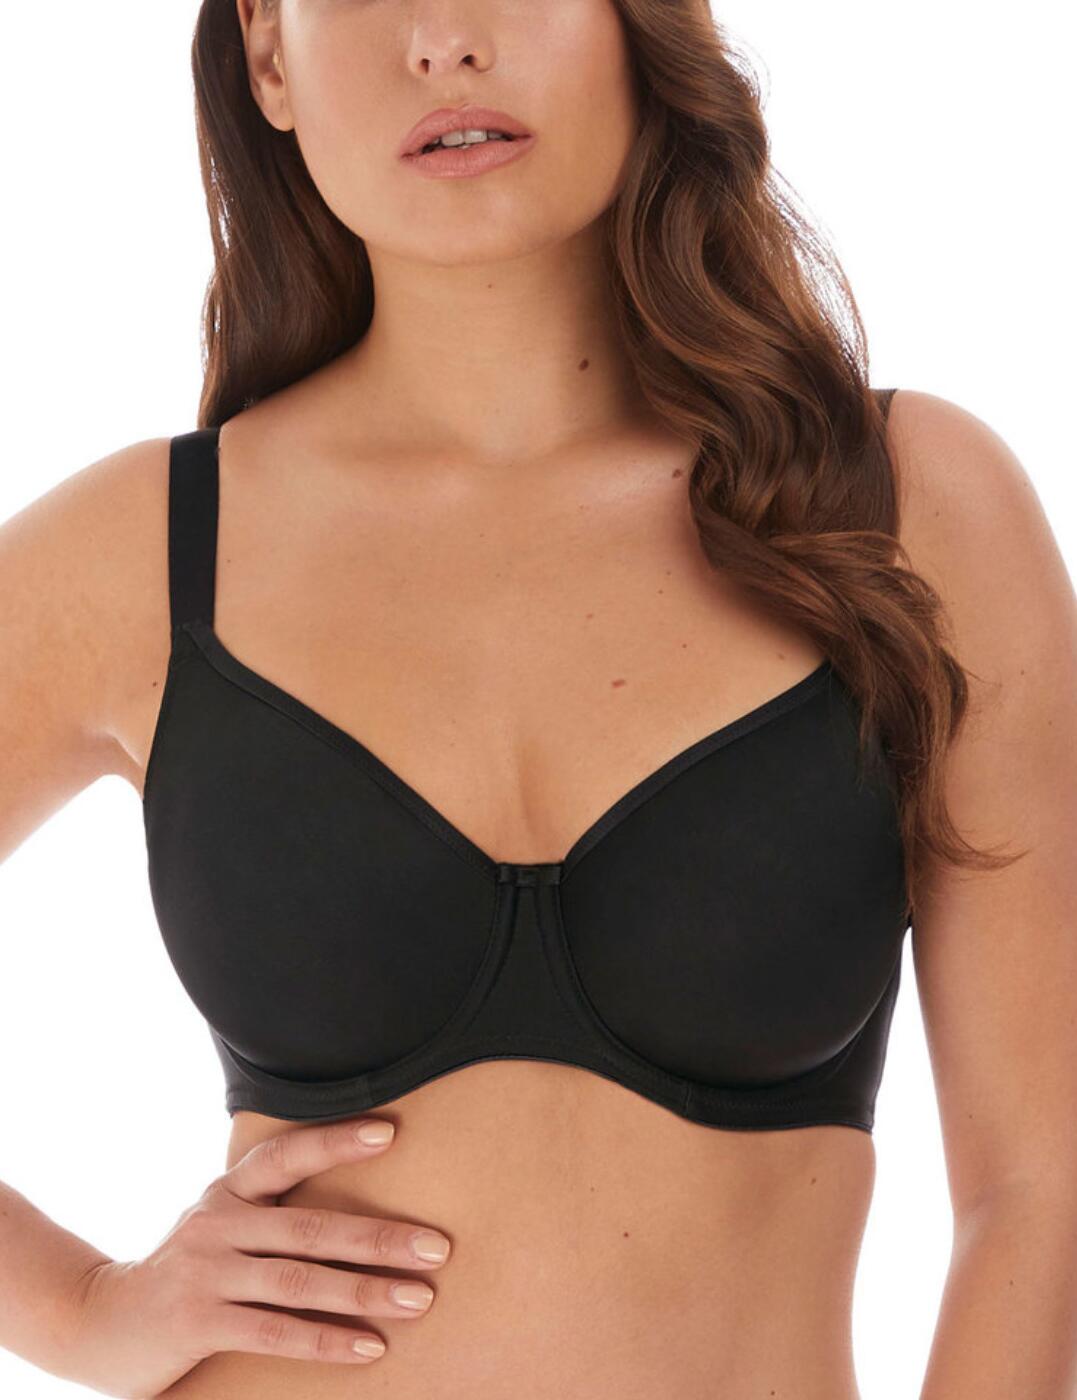 Bra Review - Fantasie Smoothing Moulded Strapless Bra (4530)